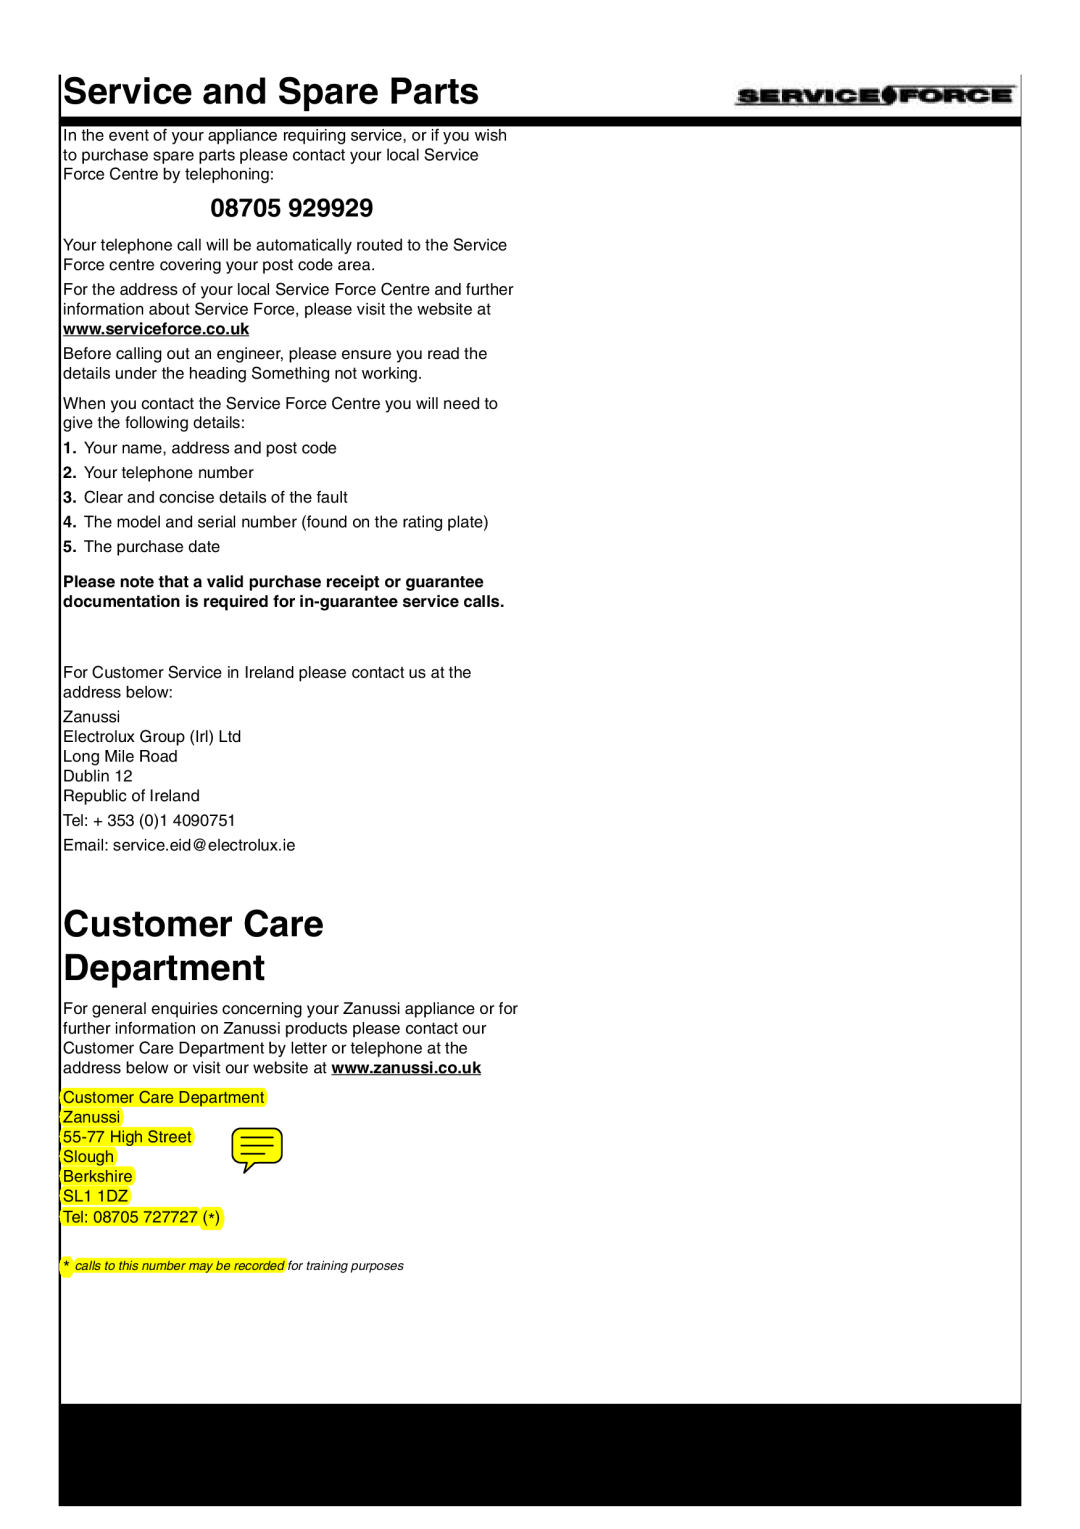 Zanussi ZHI 600 manual 08705, Service and Spare Parts, Customer Care Department 